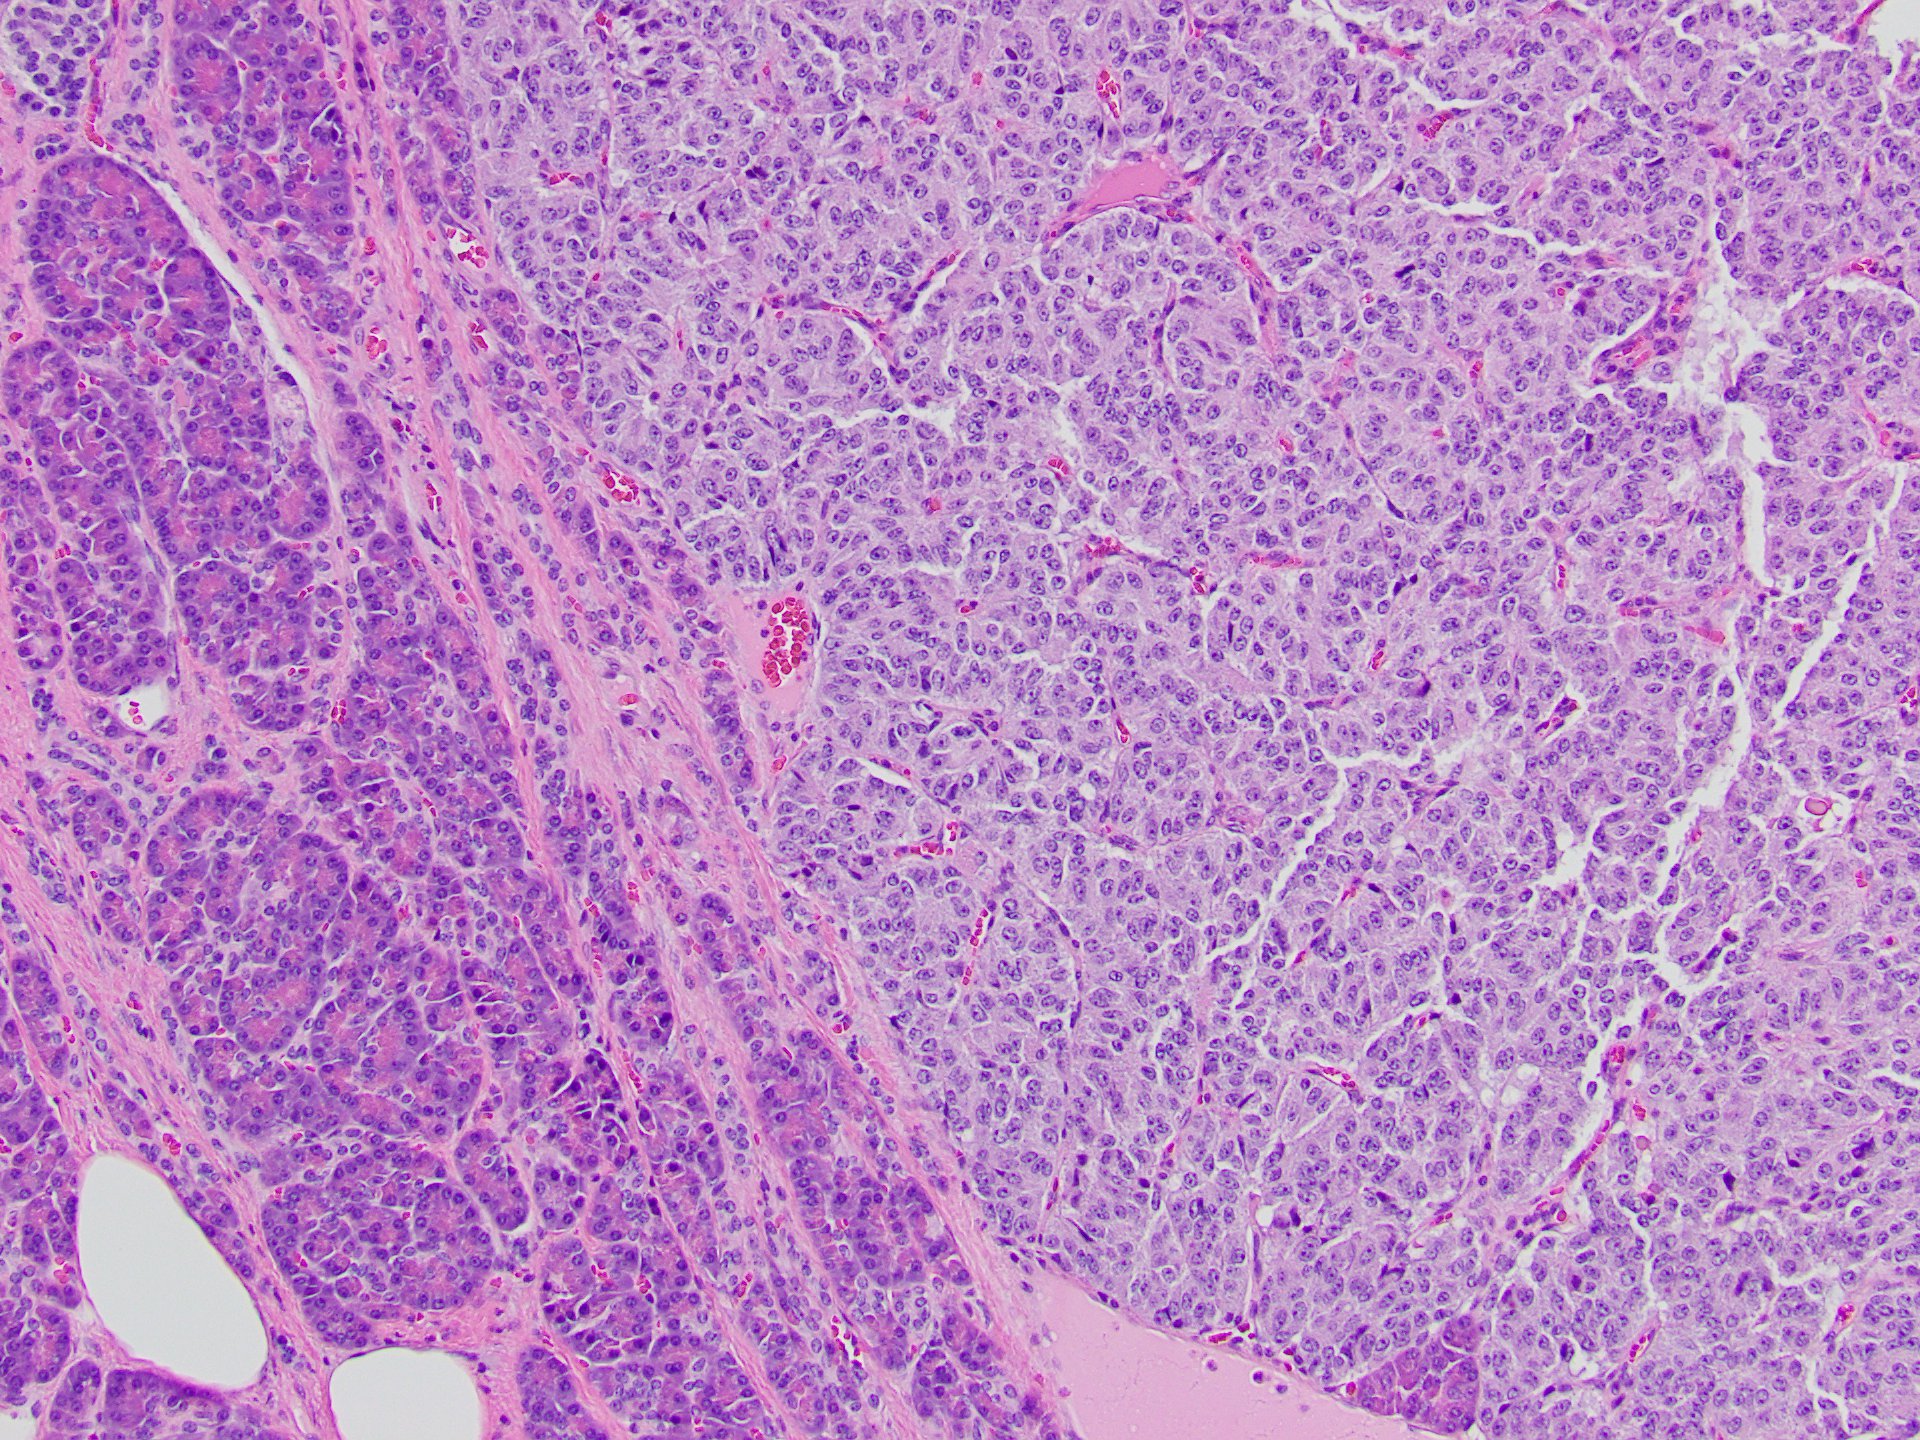 Figure 1: PanNET. Nests of tumor cells are separated by delicate vascularized fibrous stroma. Note surrounding uninvolved pancreas on the left of the field. H&E x100.